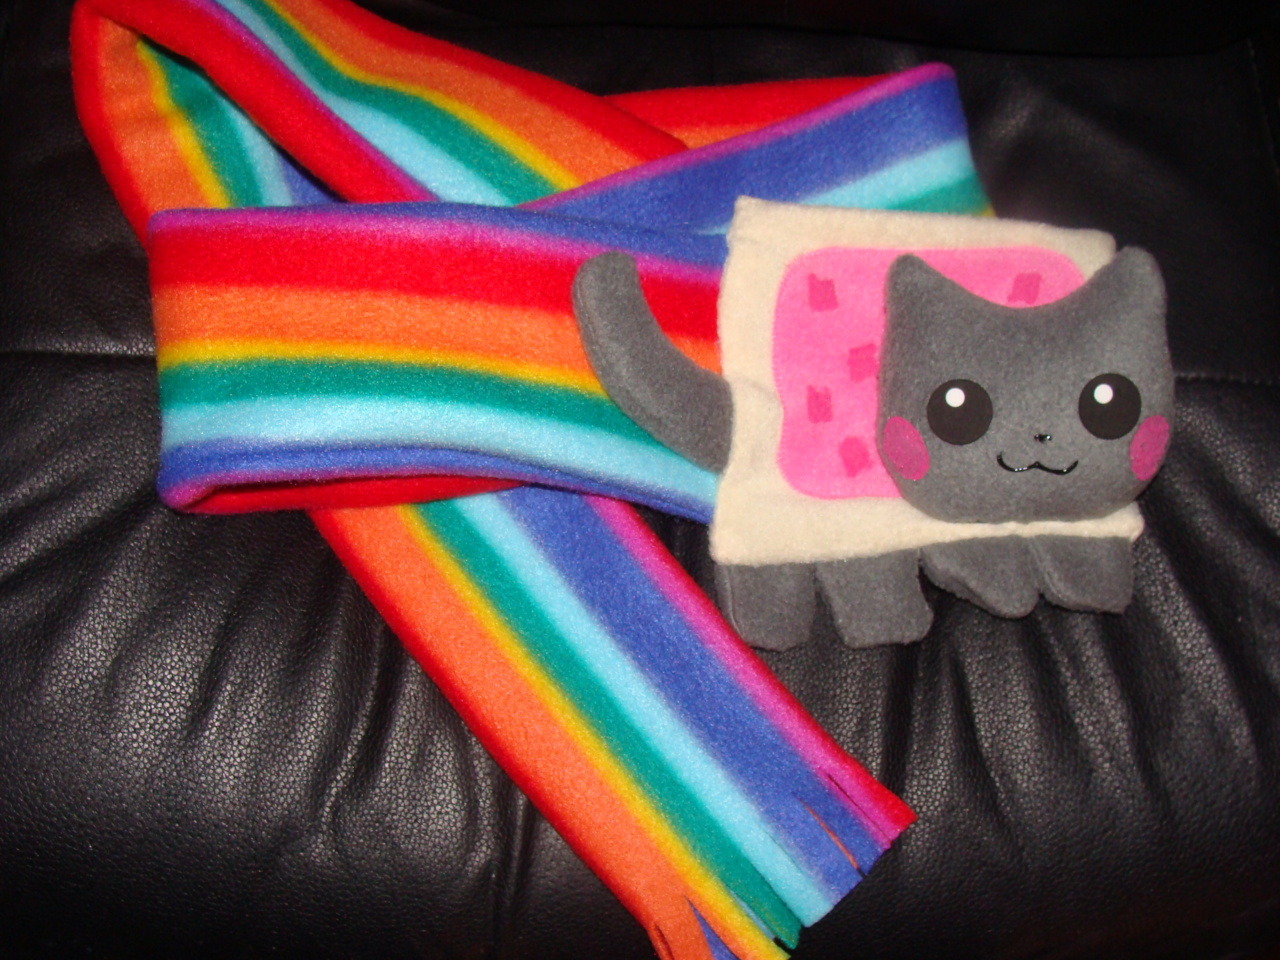 Nyan Cat scarf with and without flash. Cute right? Nathen had bought this Nyan Cat